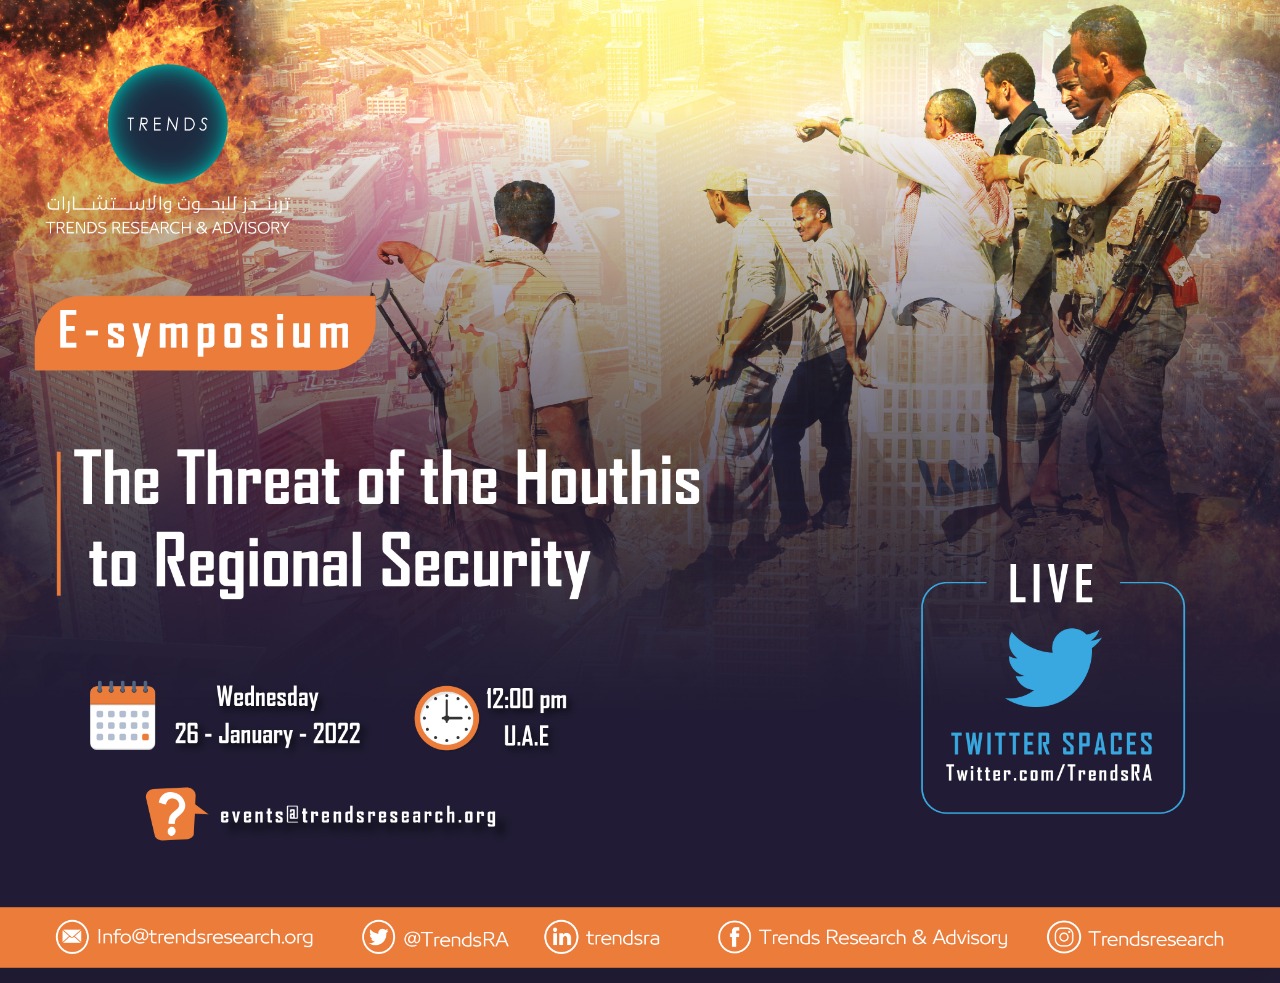 The Threat of the Houthis to Regional Security